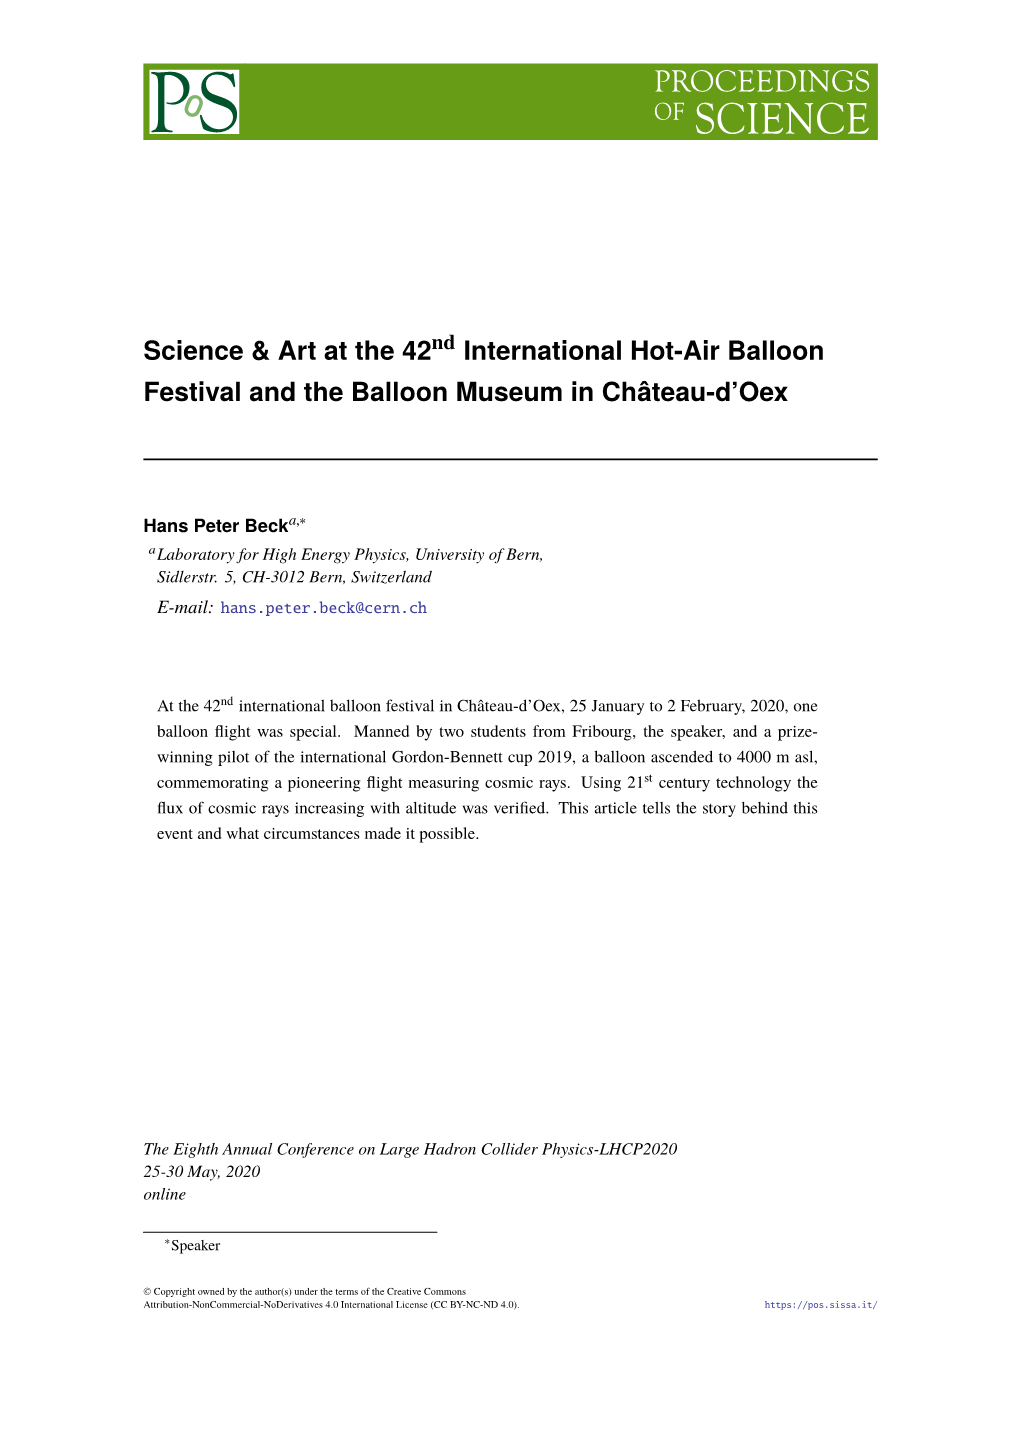 Science & Art at the 42 International Hot-Air Balloon Festival and The